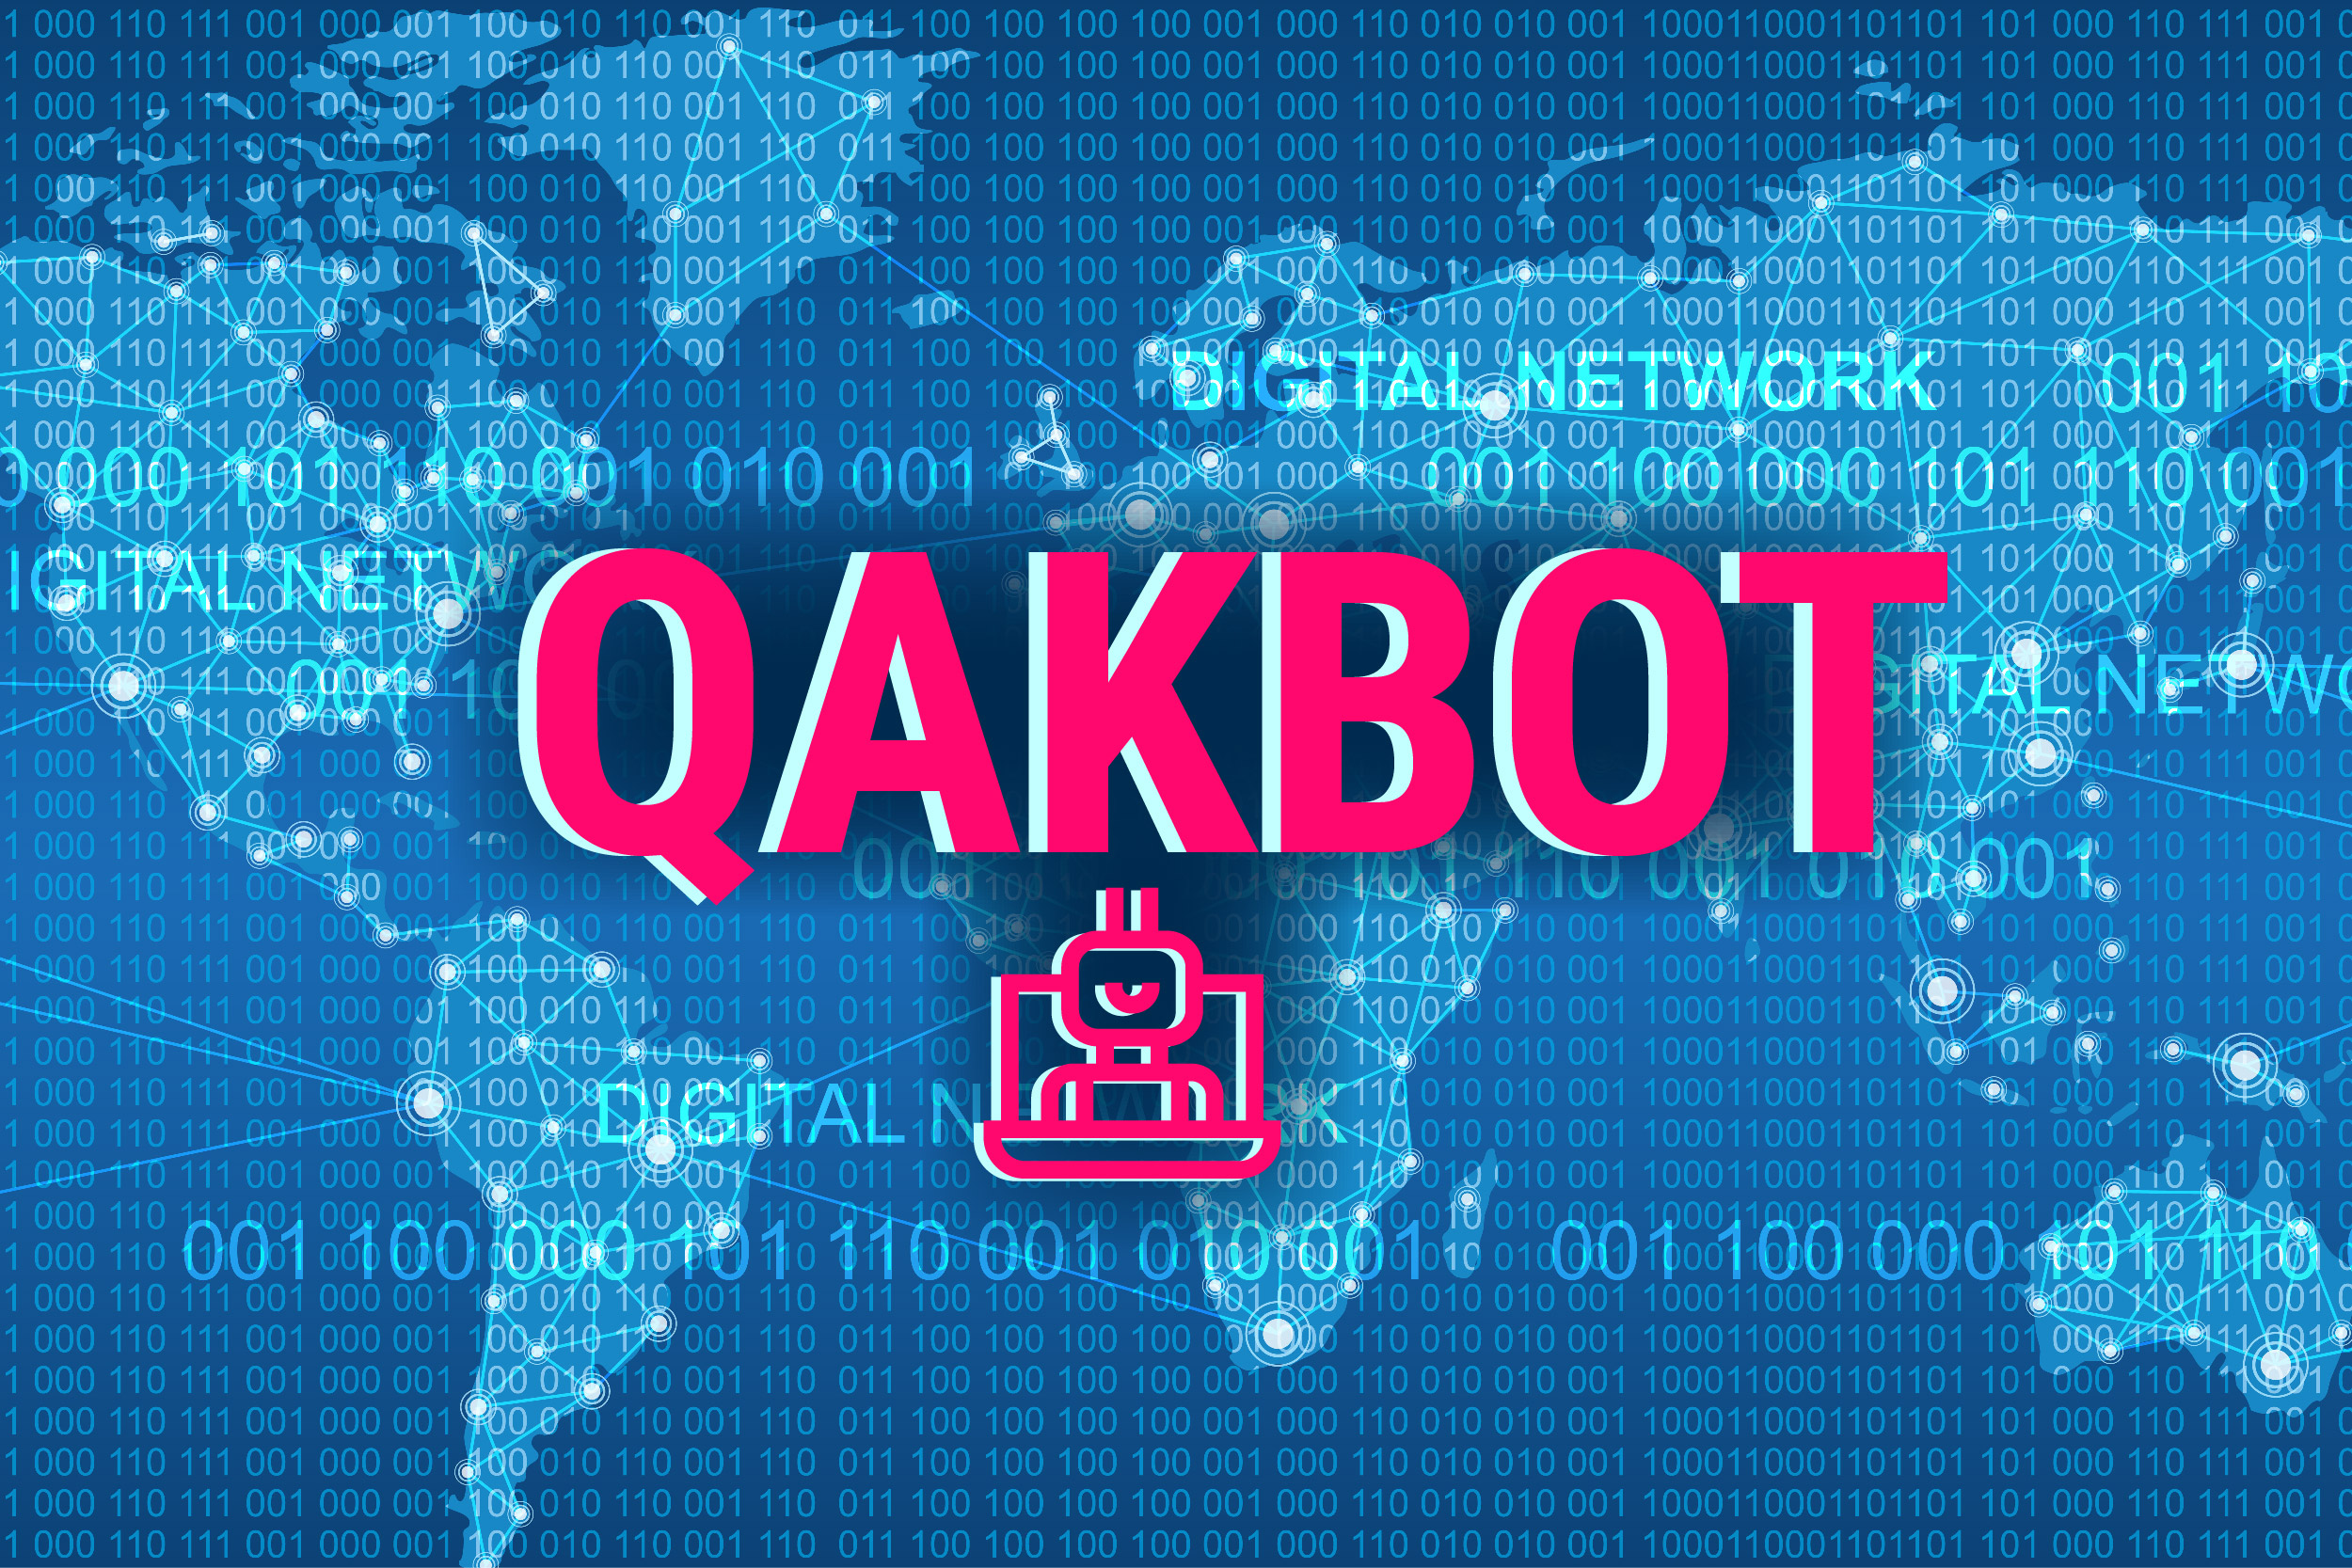 QakBot Malware Group Increases Command and Control Network with Additional  15 New Servers